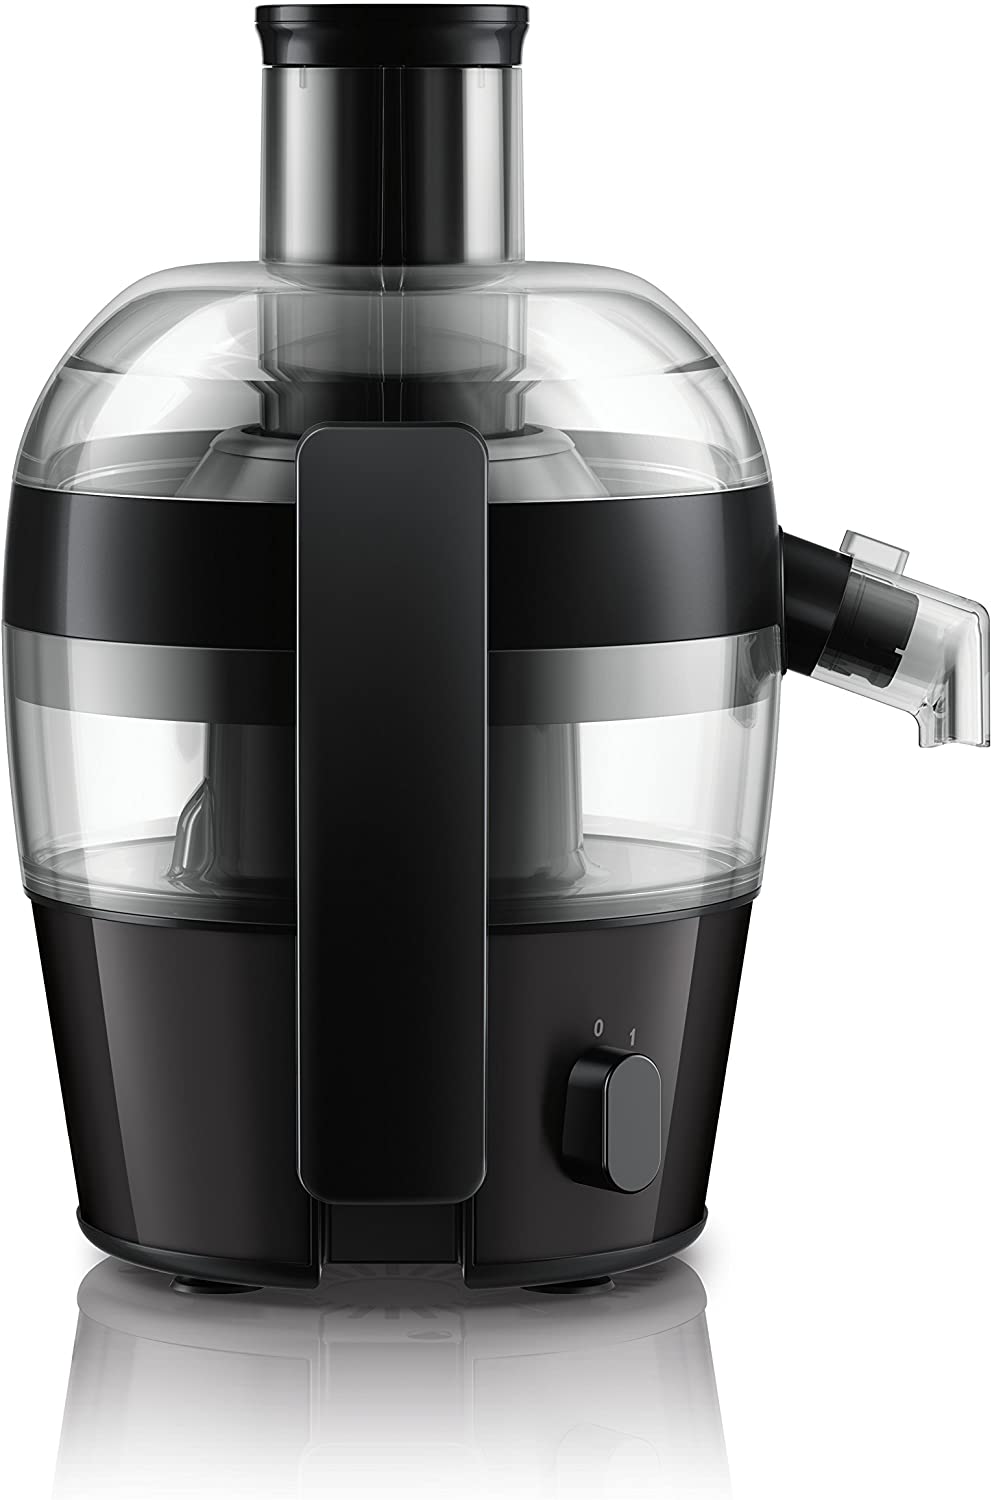 Philips Domestic Appliances Philips Viva Collection HR1832/03 Citrus Juicer (Black, 50/60 Hz, ABS, ABS Synthetic)